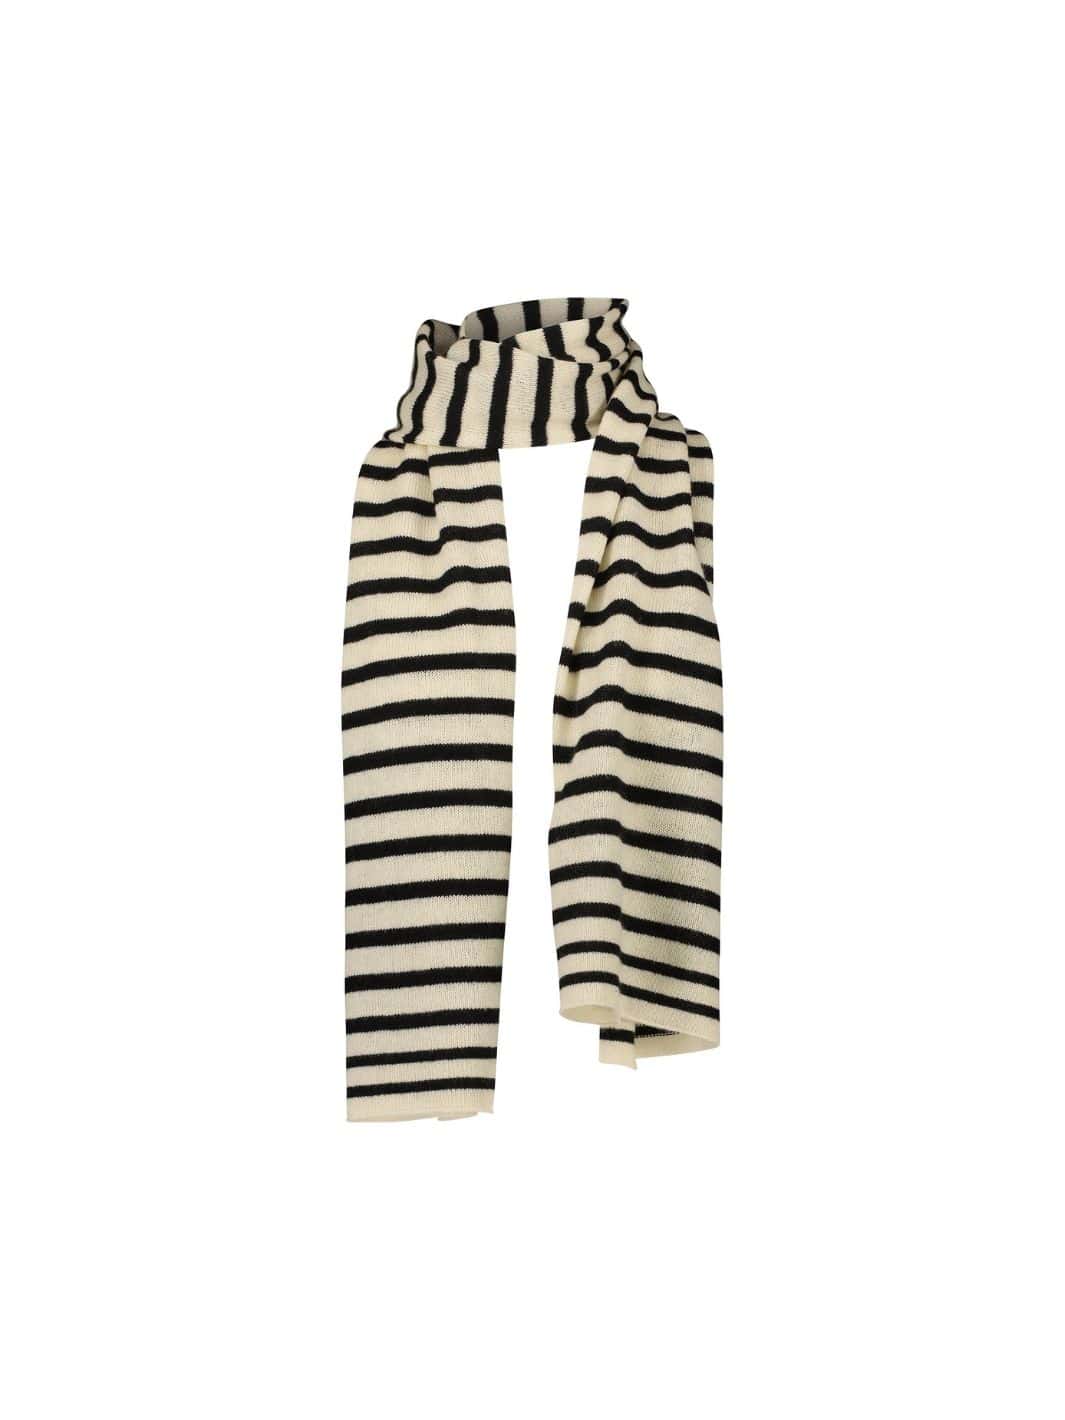 Allude Accessories Skjerf | Scarf Navy/Cream Stripes